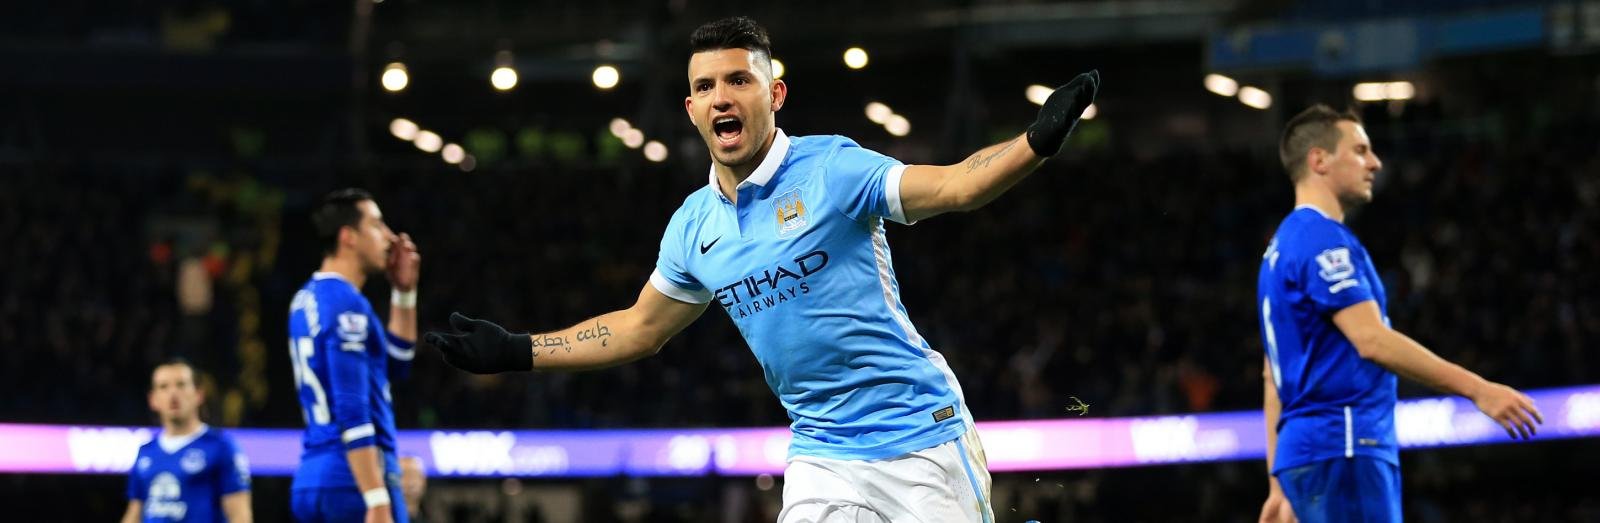 Man City’s display in Kiev a confidence boost ahead of Capital One Cup final